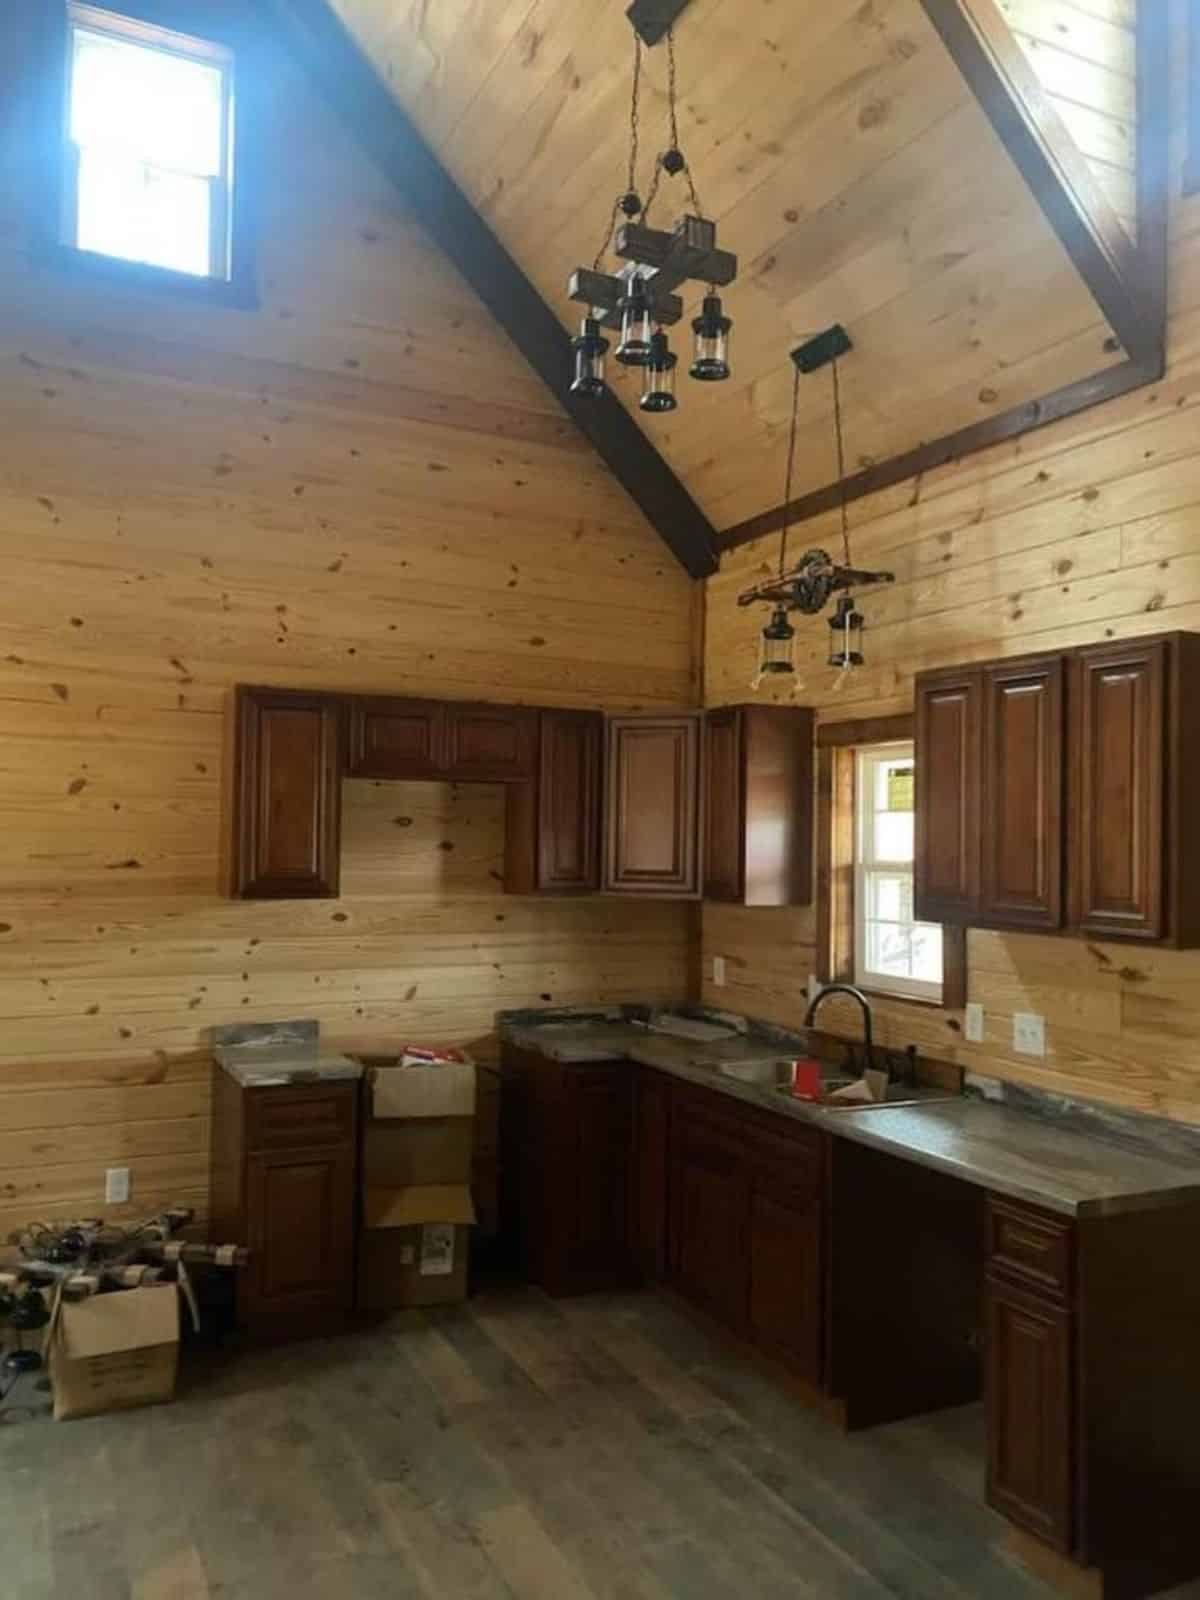 kitchen area of rustic version of two story cabin home